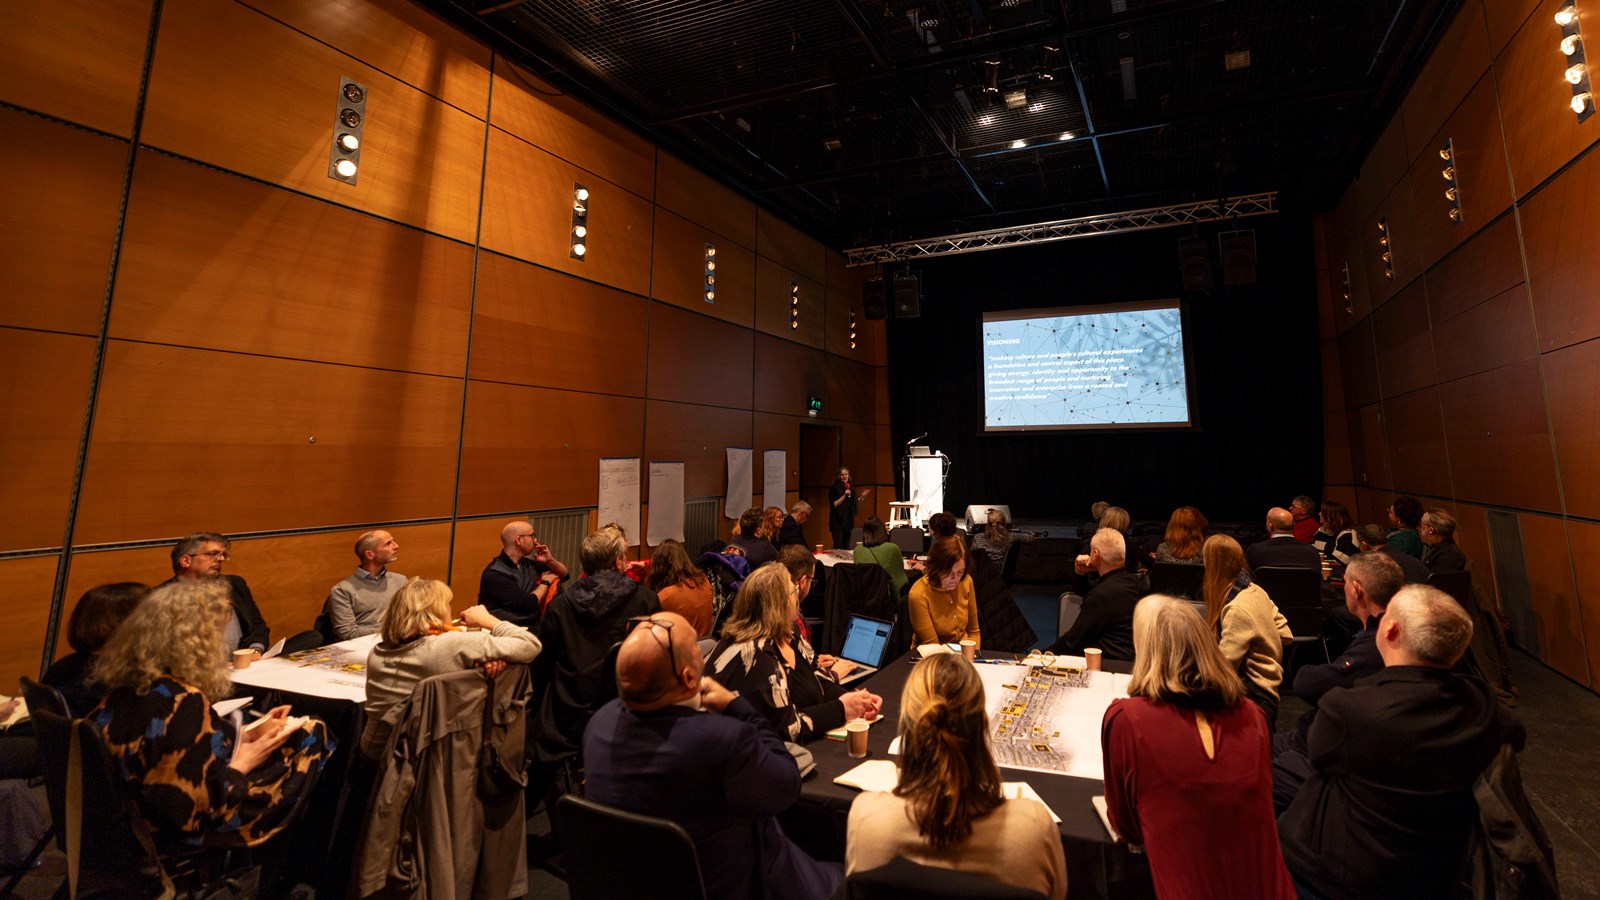 Groups of people sitting down at tables look at a PowerPoint screen during a workshop at the Centre for Contemporary Arts on Sauchiehall Street.